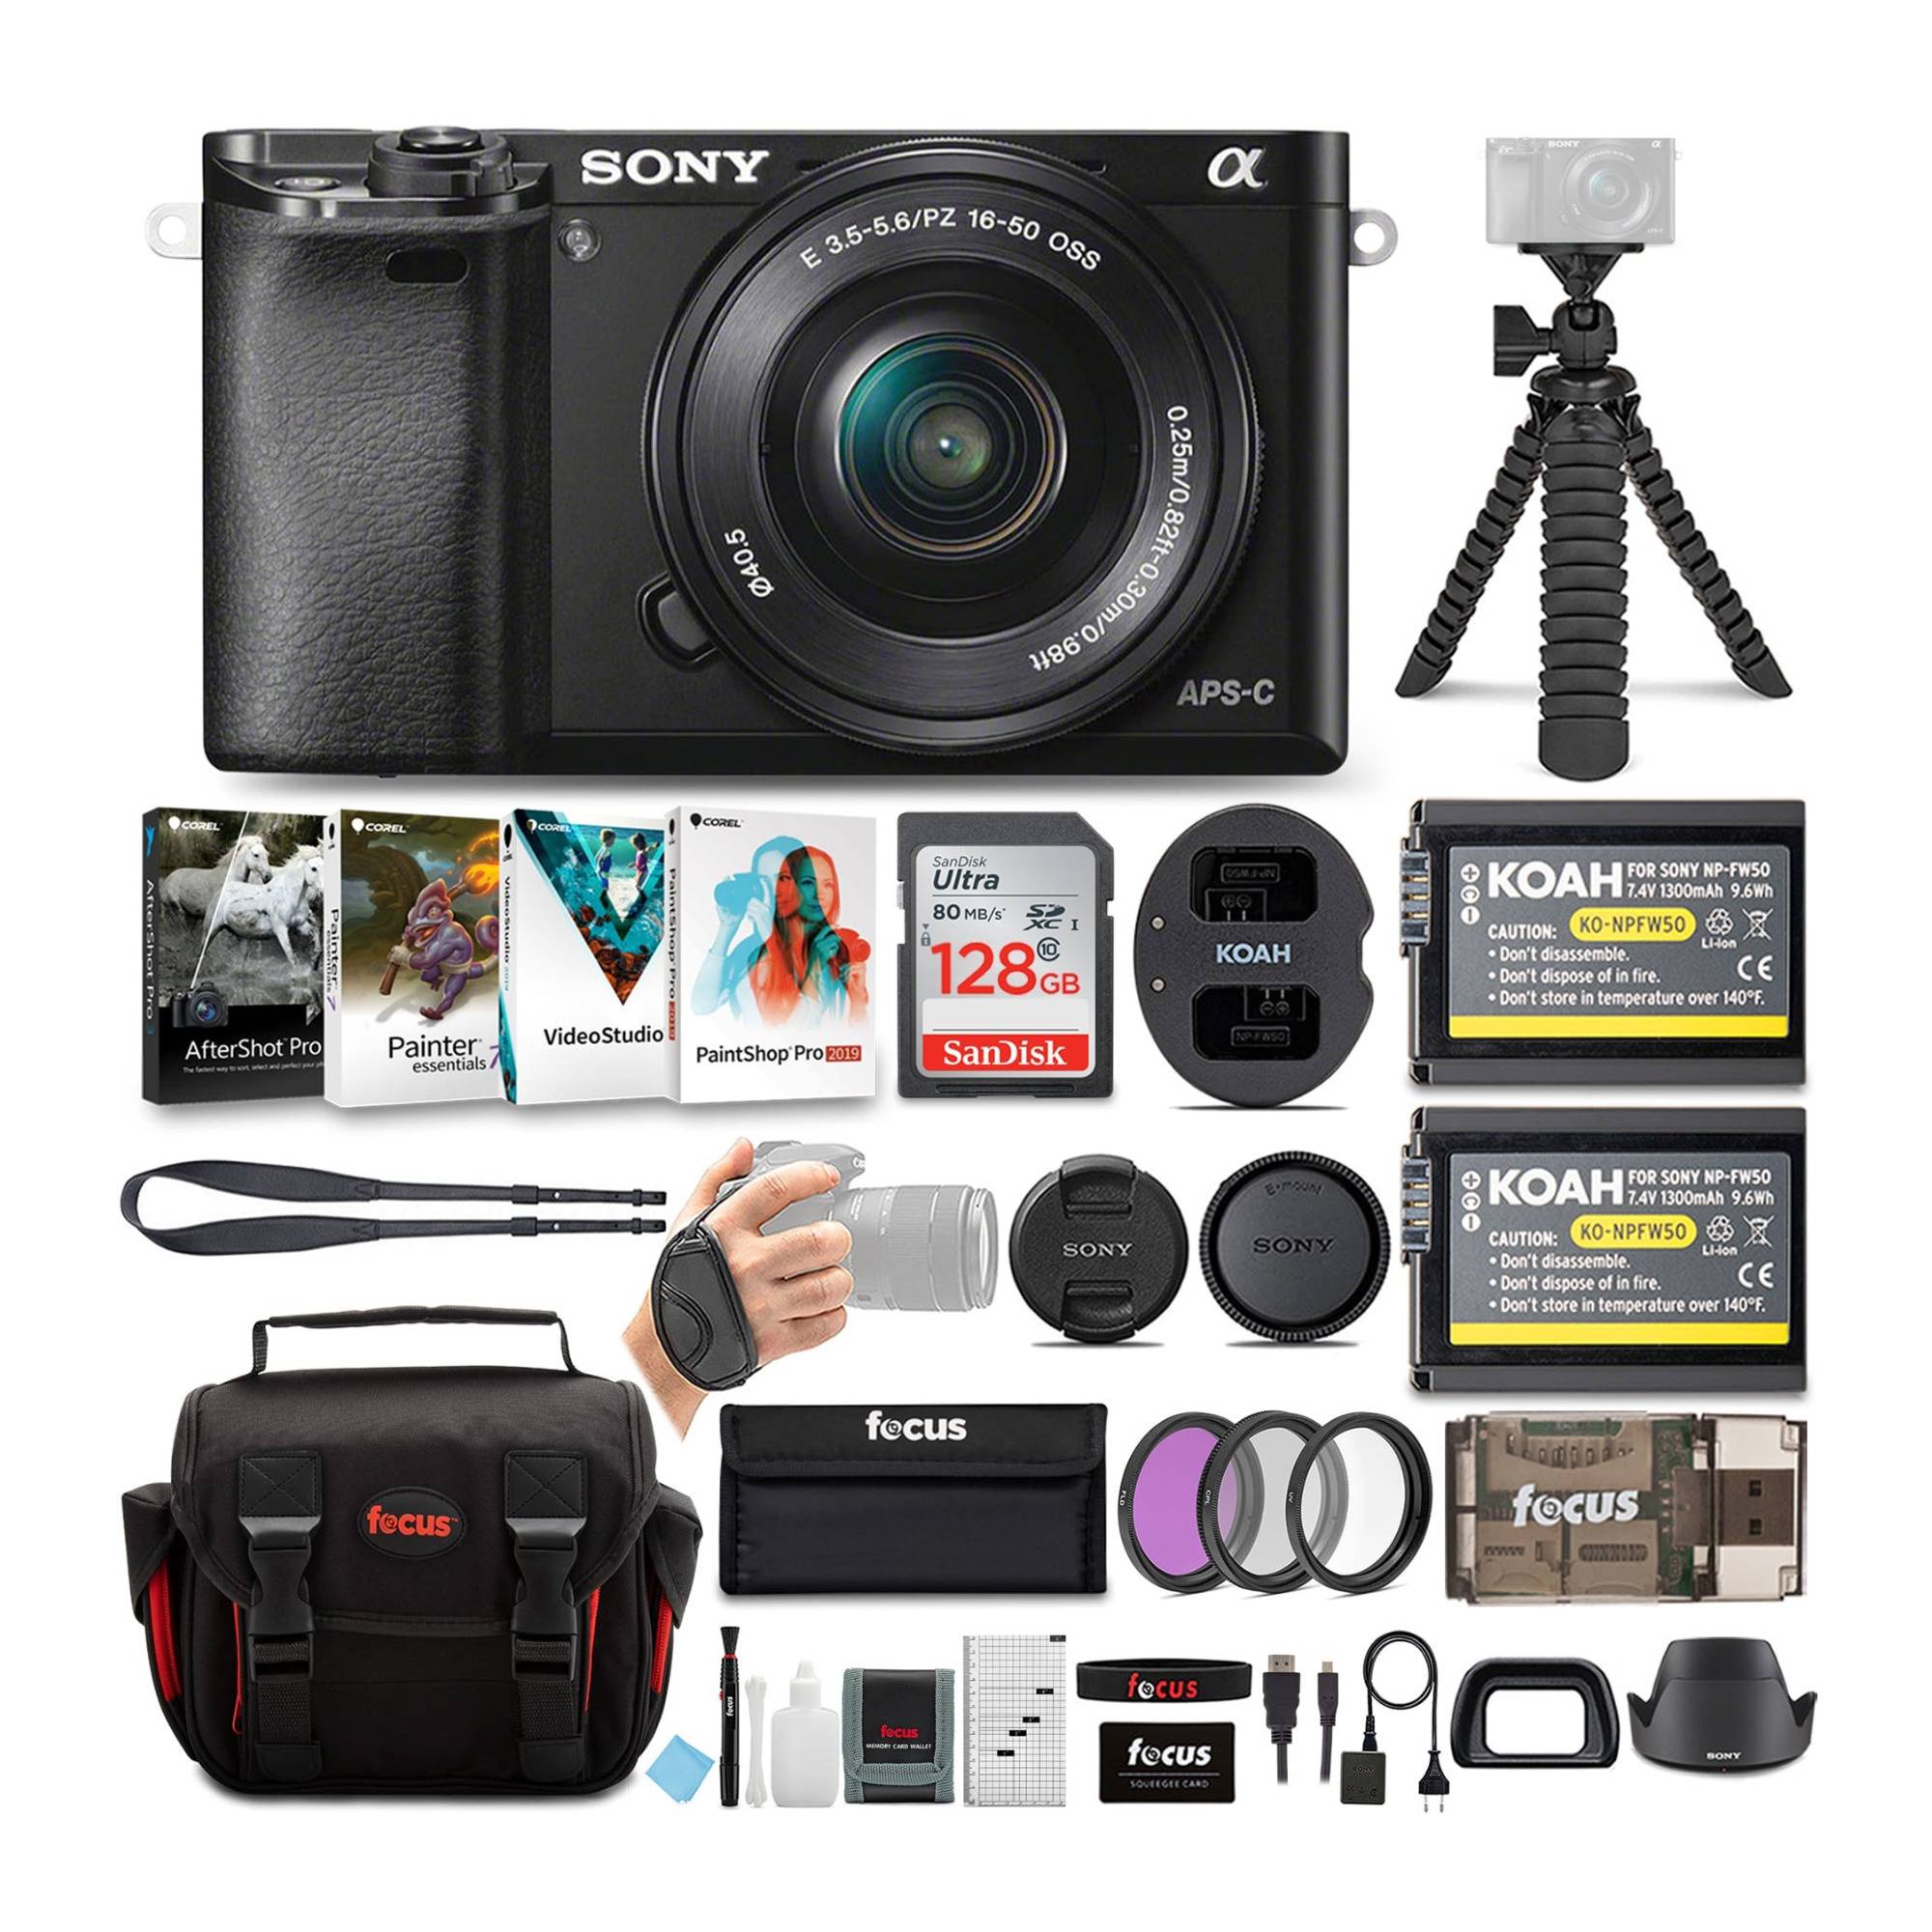 Sony Alpha a6100 APS-C Mirrorless Interchangeable-Lens Camera with 16-50mm Lens and Accessory Bundle